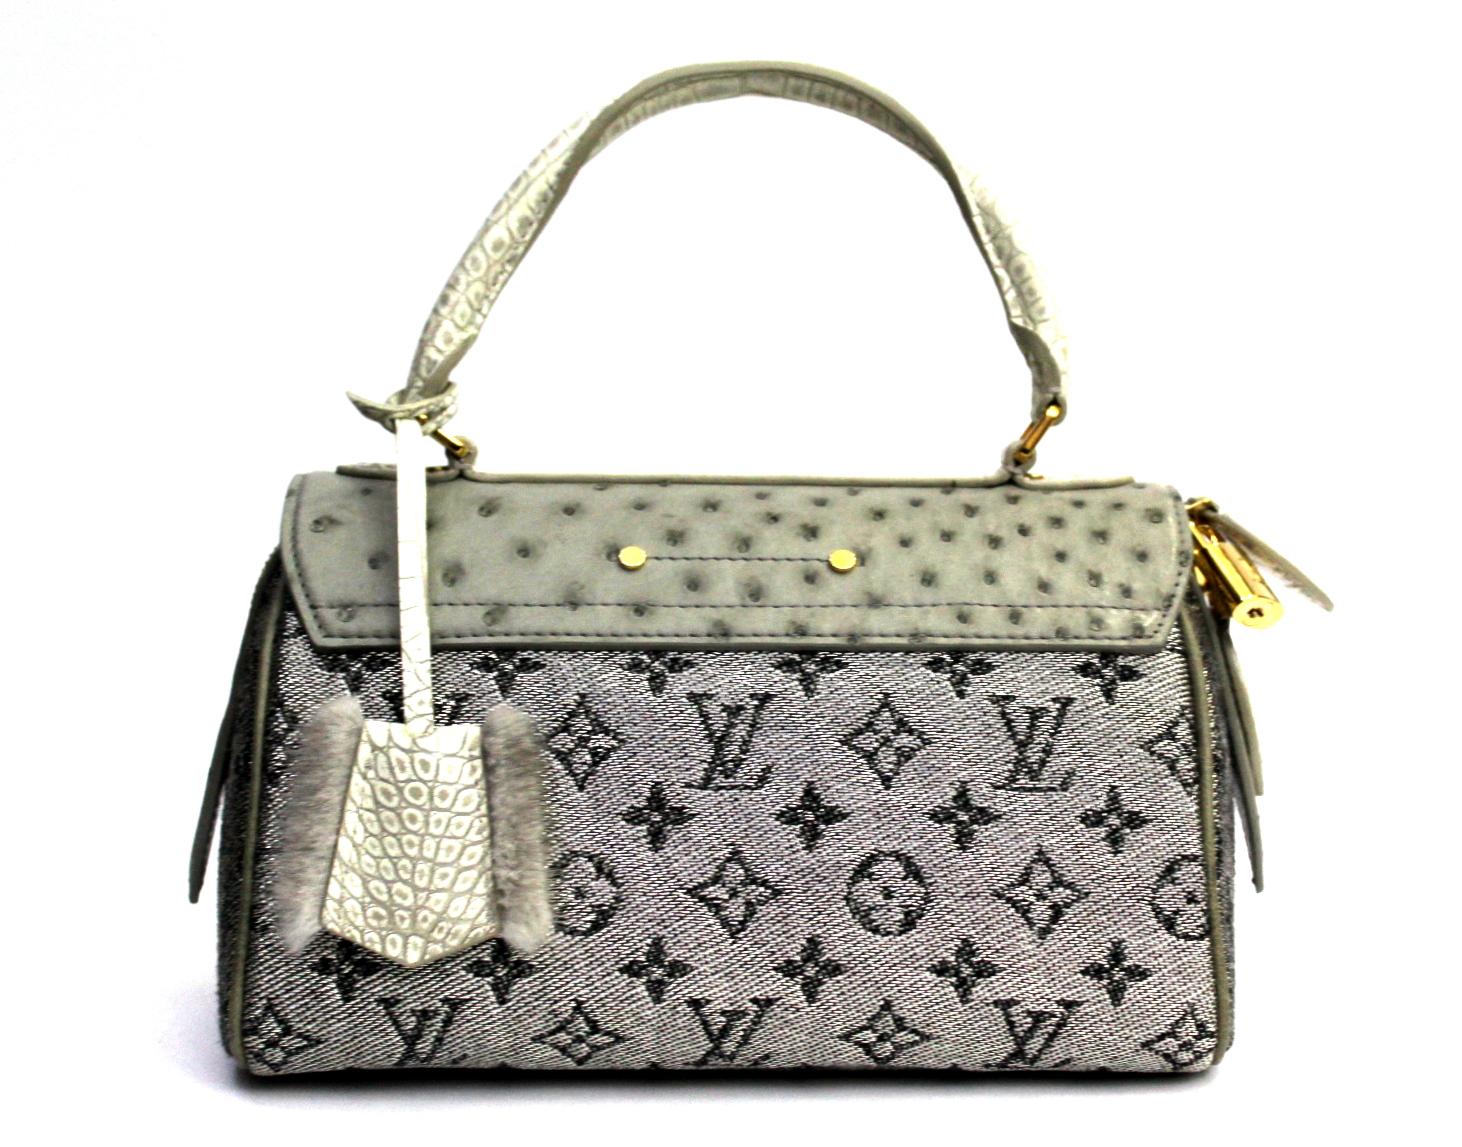 This LOUIS VUITTON Carrousel is in Excellent Pre-Owned Condition accompanied by Louis Vuitton Dust Bag, Lock, Keys, Clochette, Care Booklet, Tag, Bag Shaper. Circa 2010. Primarily made from Alligator Leather, Ostrich Leather, Jacquard Fabric